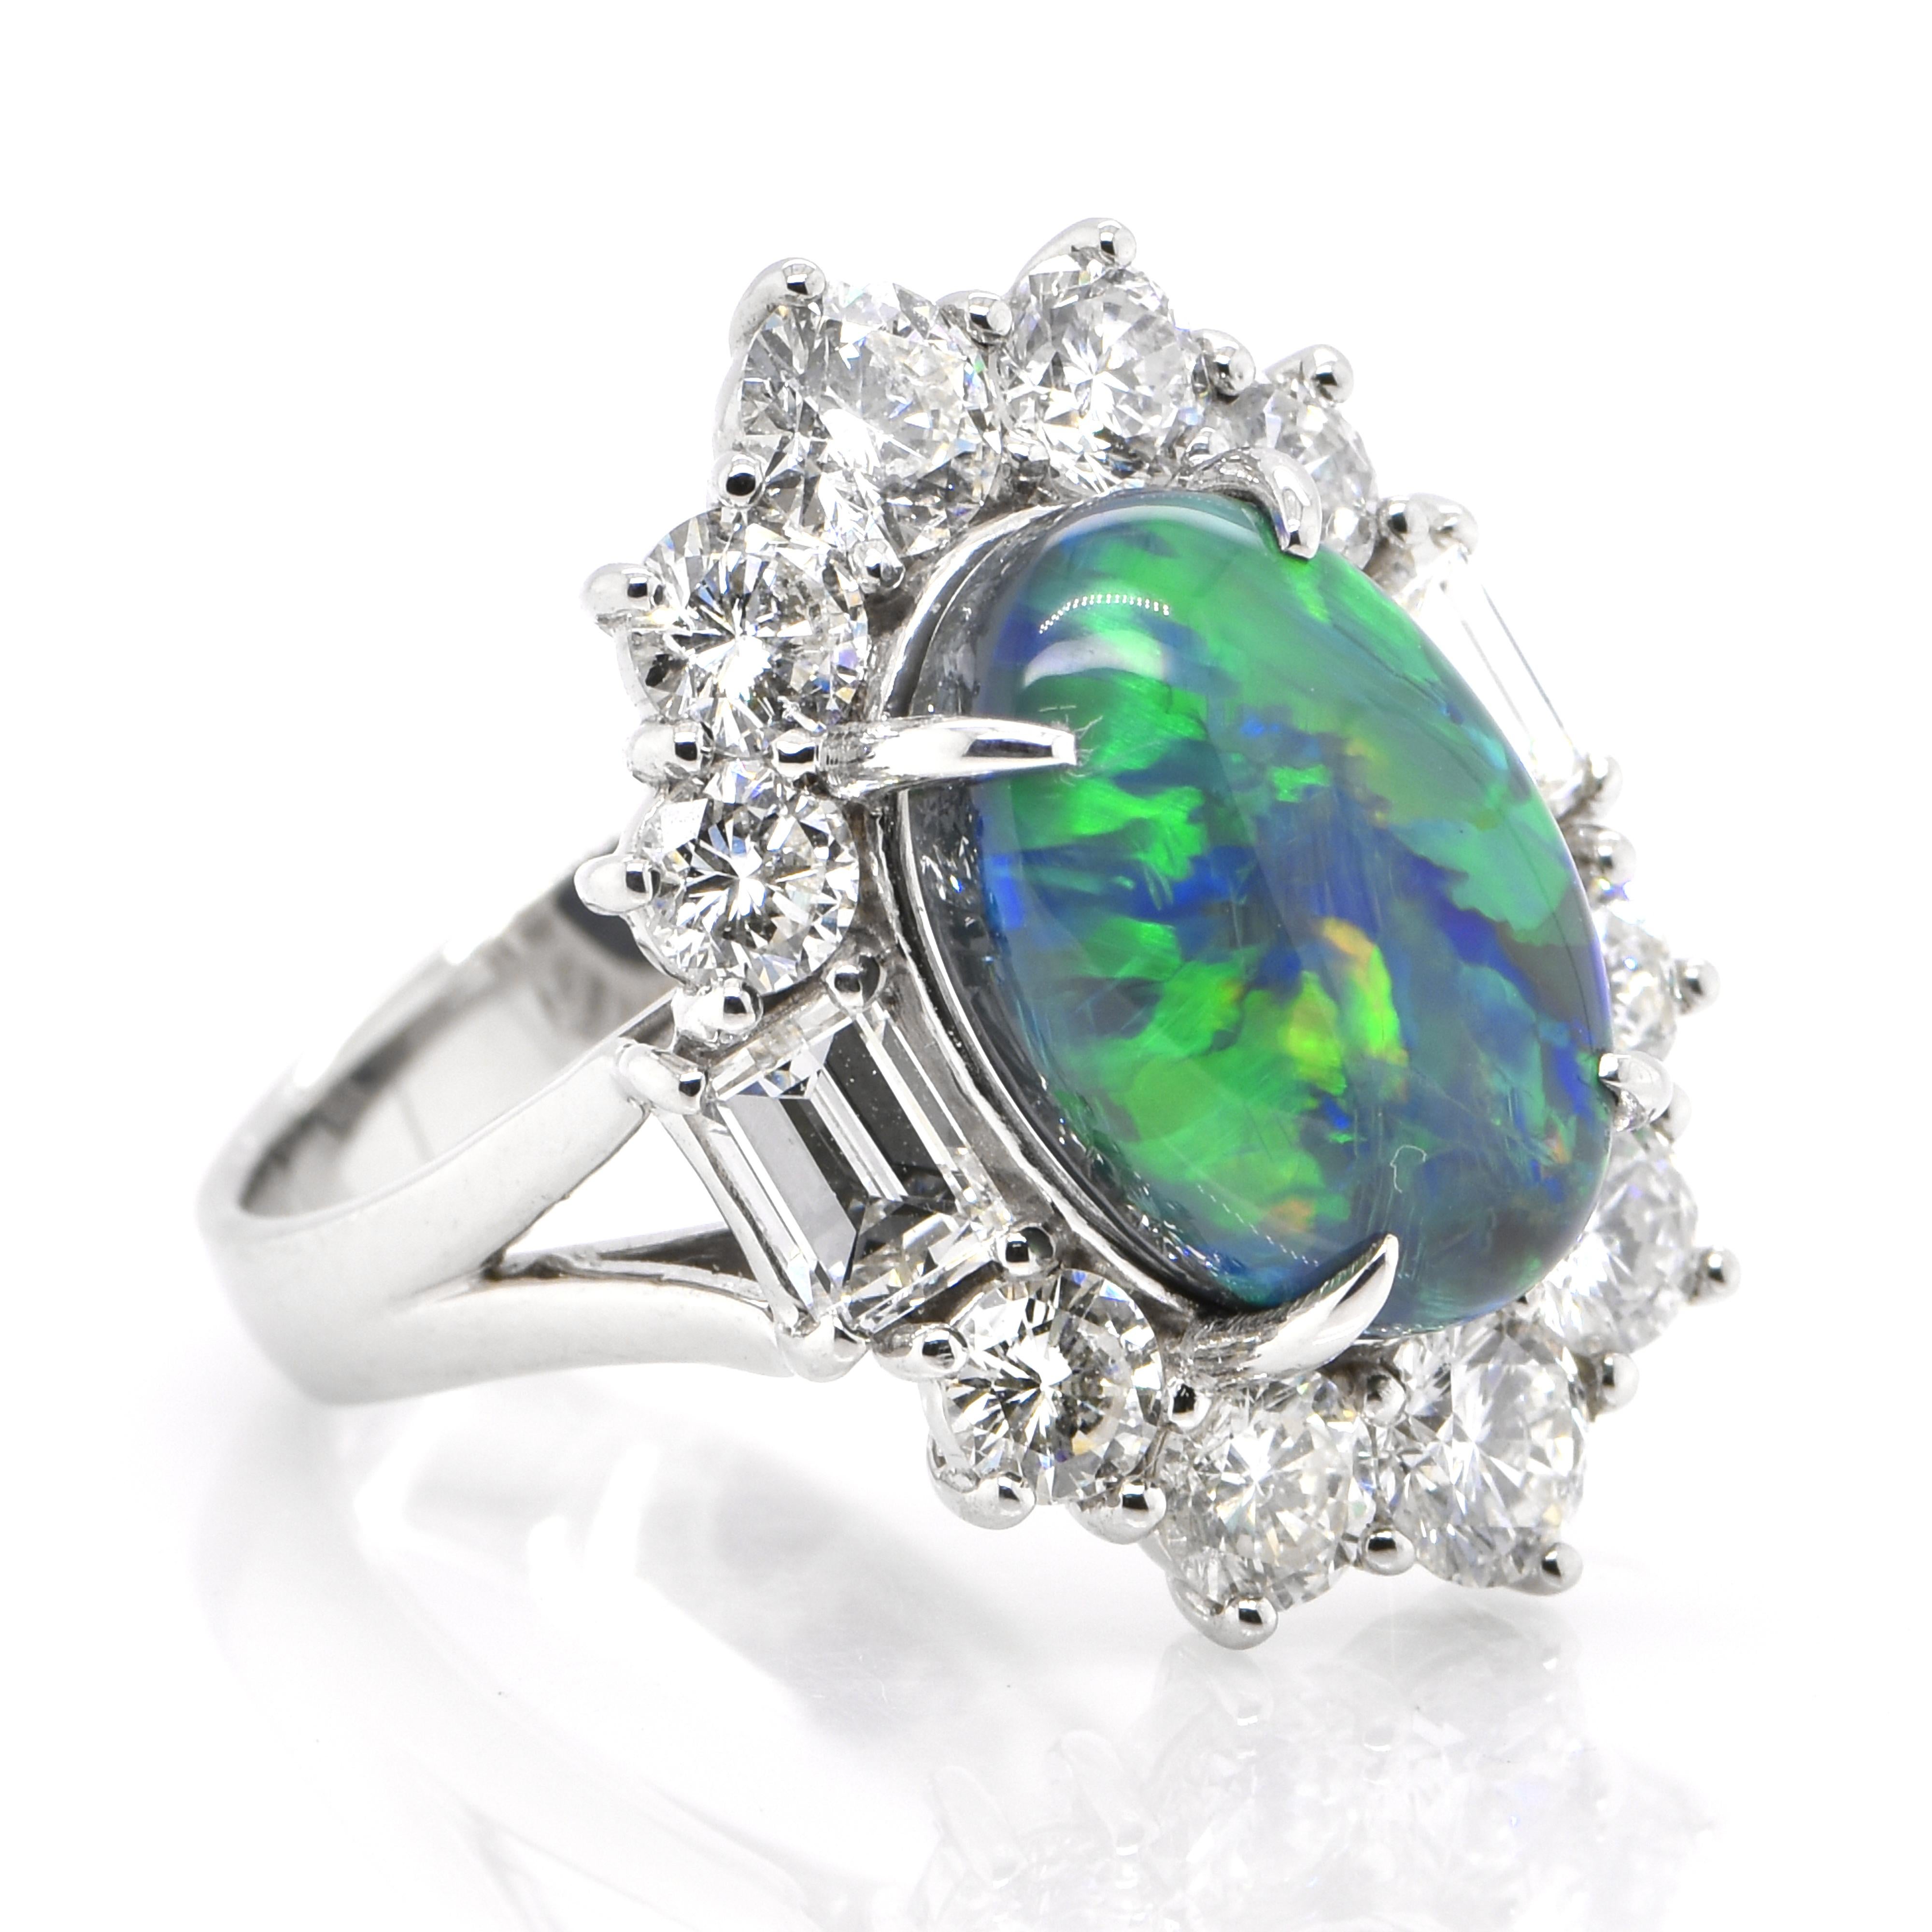 A beautiful ring featuring a 5.11 Carat, Natural, Australian (Lighting Ridge) Black Opal and 3.60 Carats of Diamond Accents set in Platinum. The Opal displays very good play of color! Opals are known for exhibiting flashes of rainbow colors known as